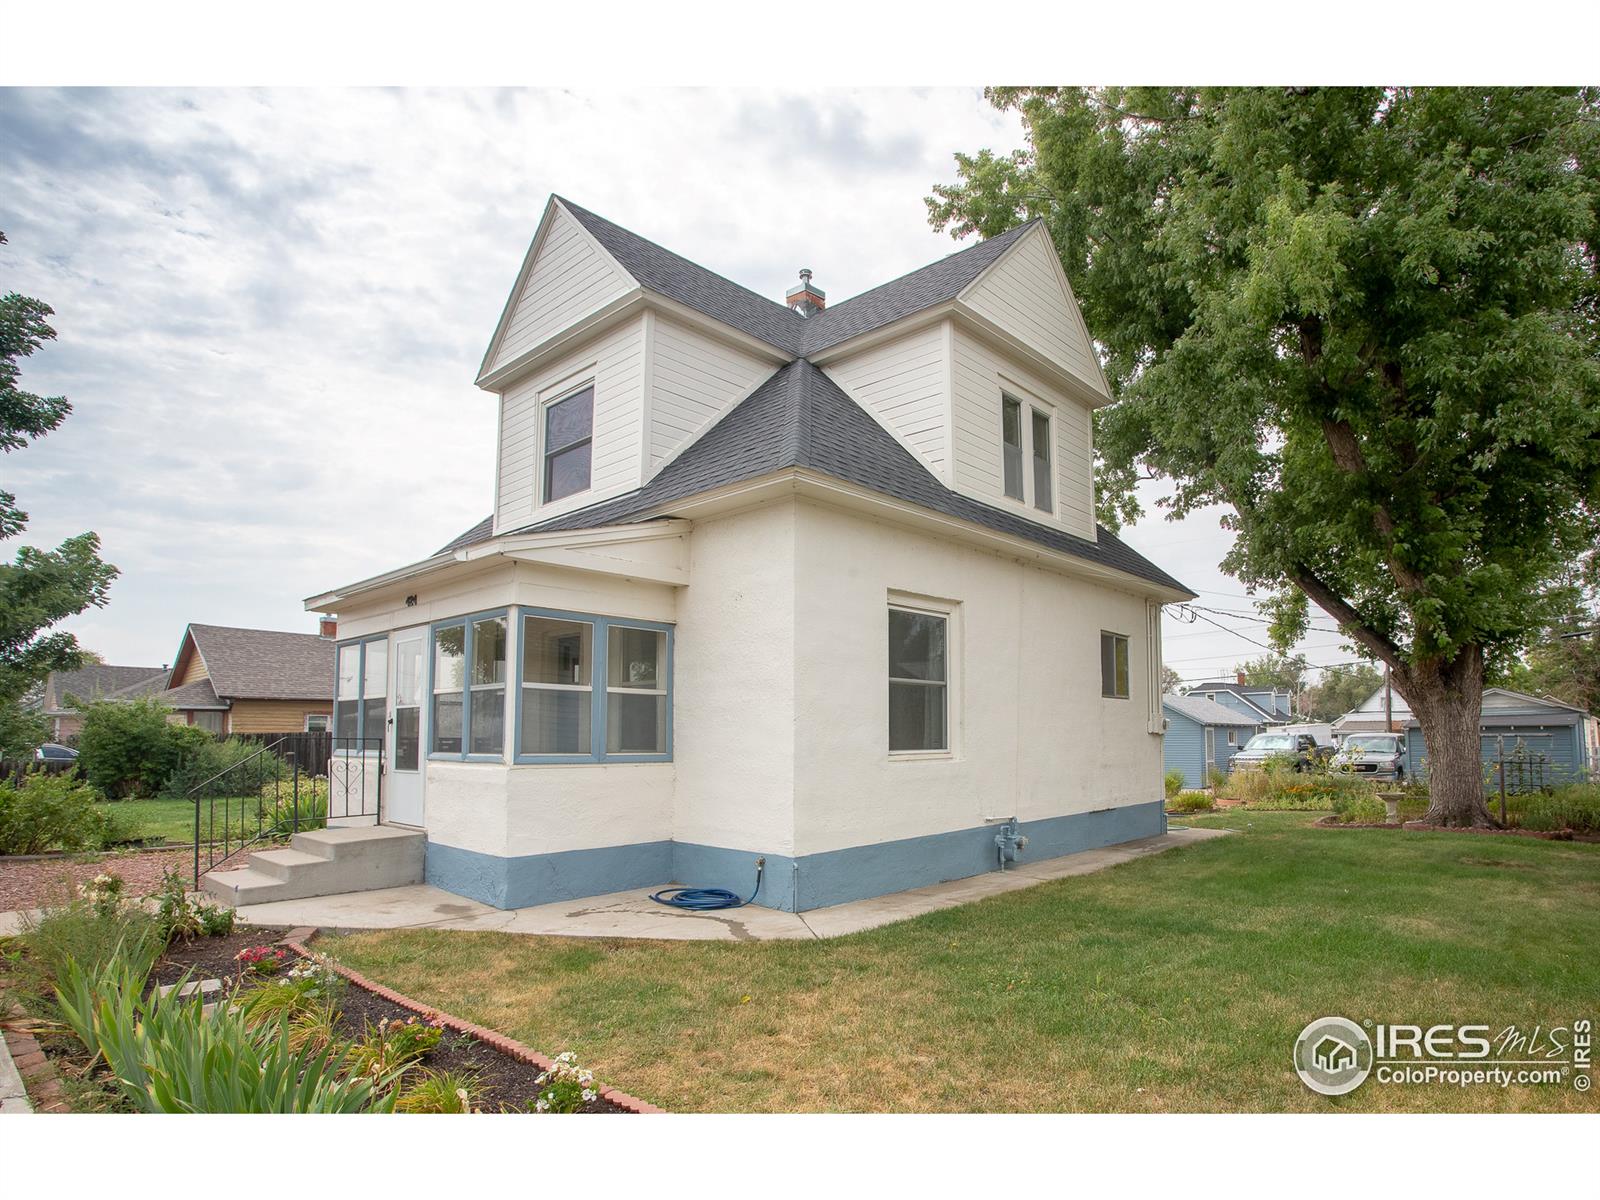 424 7th, Greeley, CO